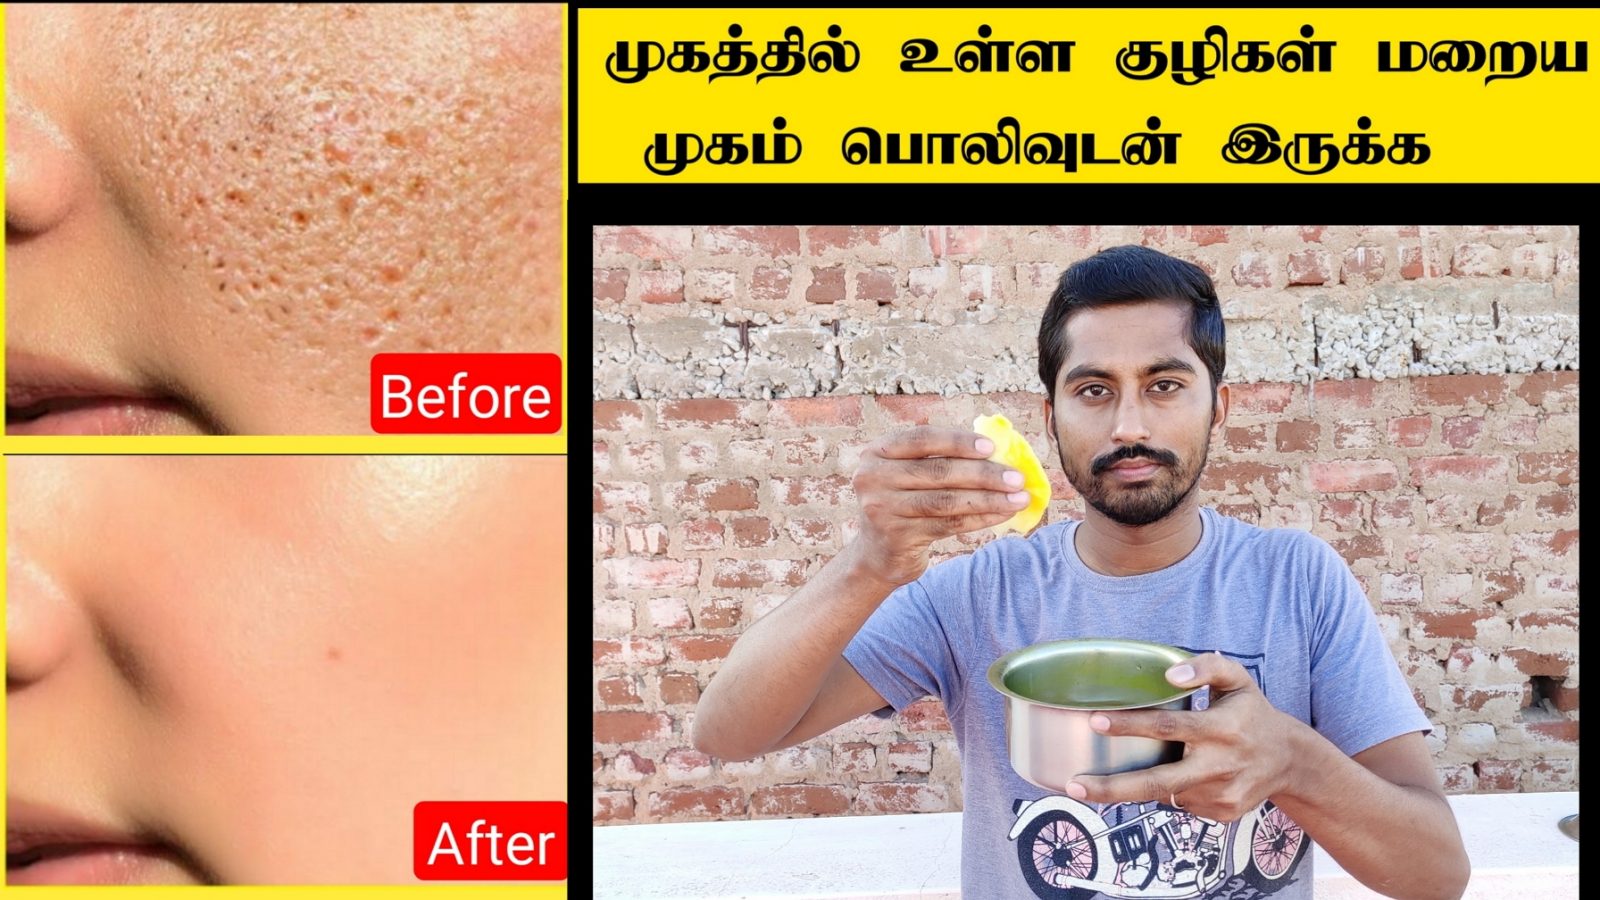 How to remove large open pores naturally in Tamil and to get clear face | Home remedy for open pores